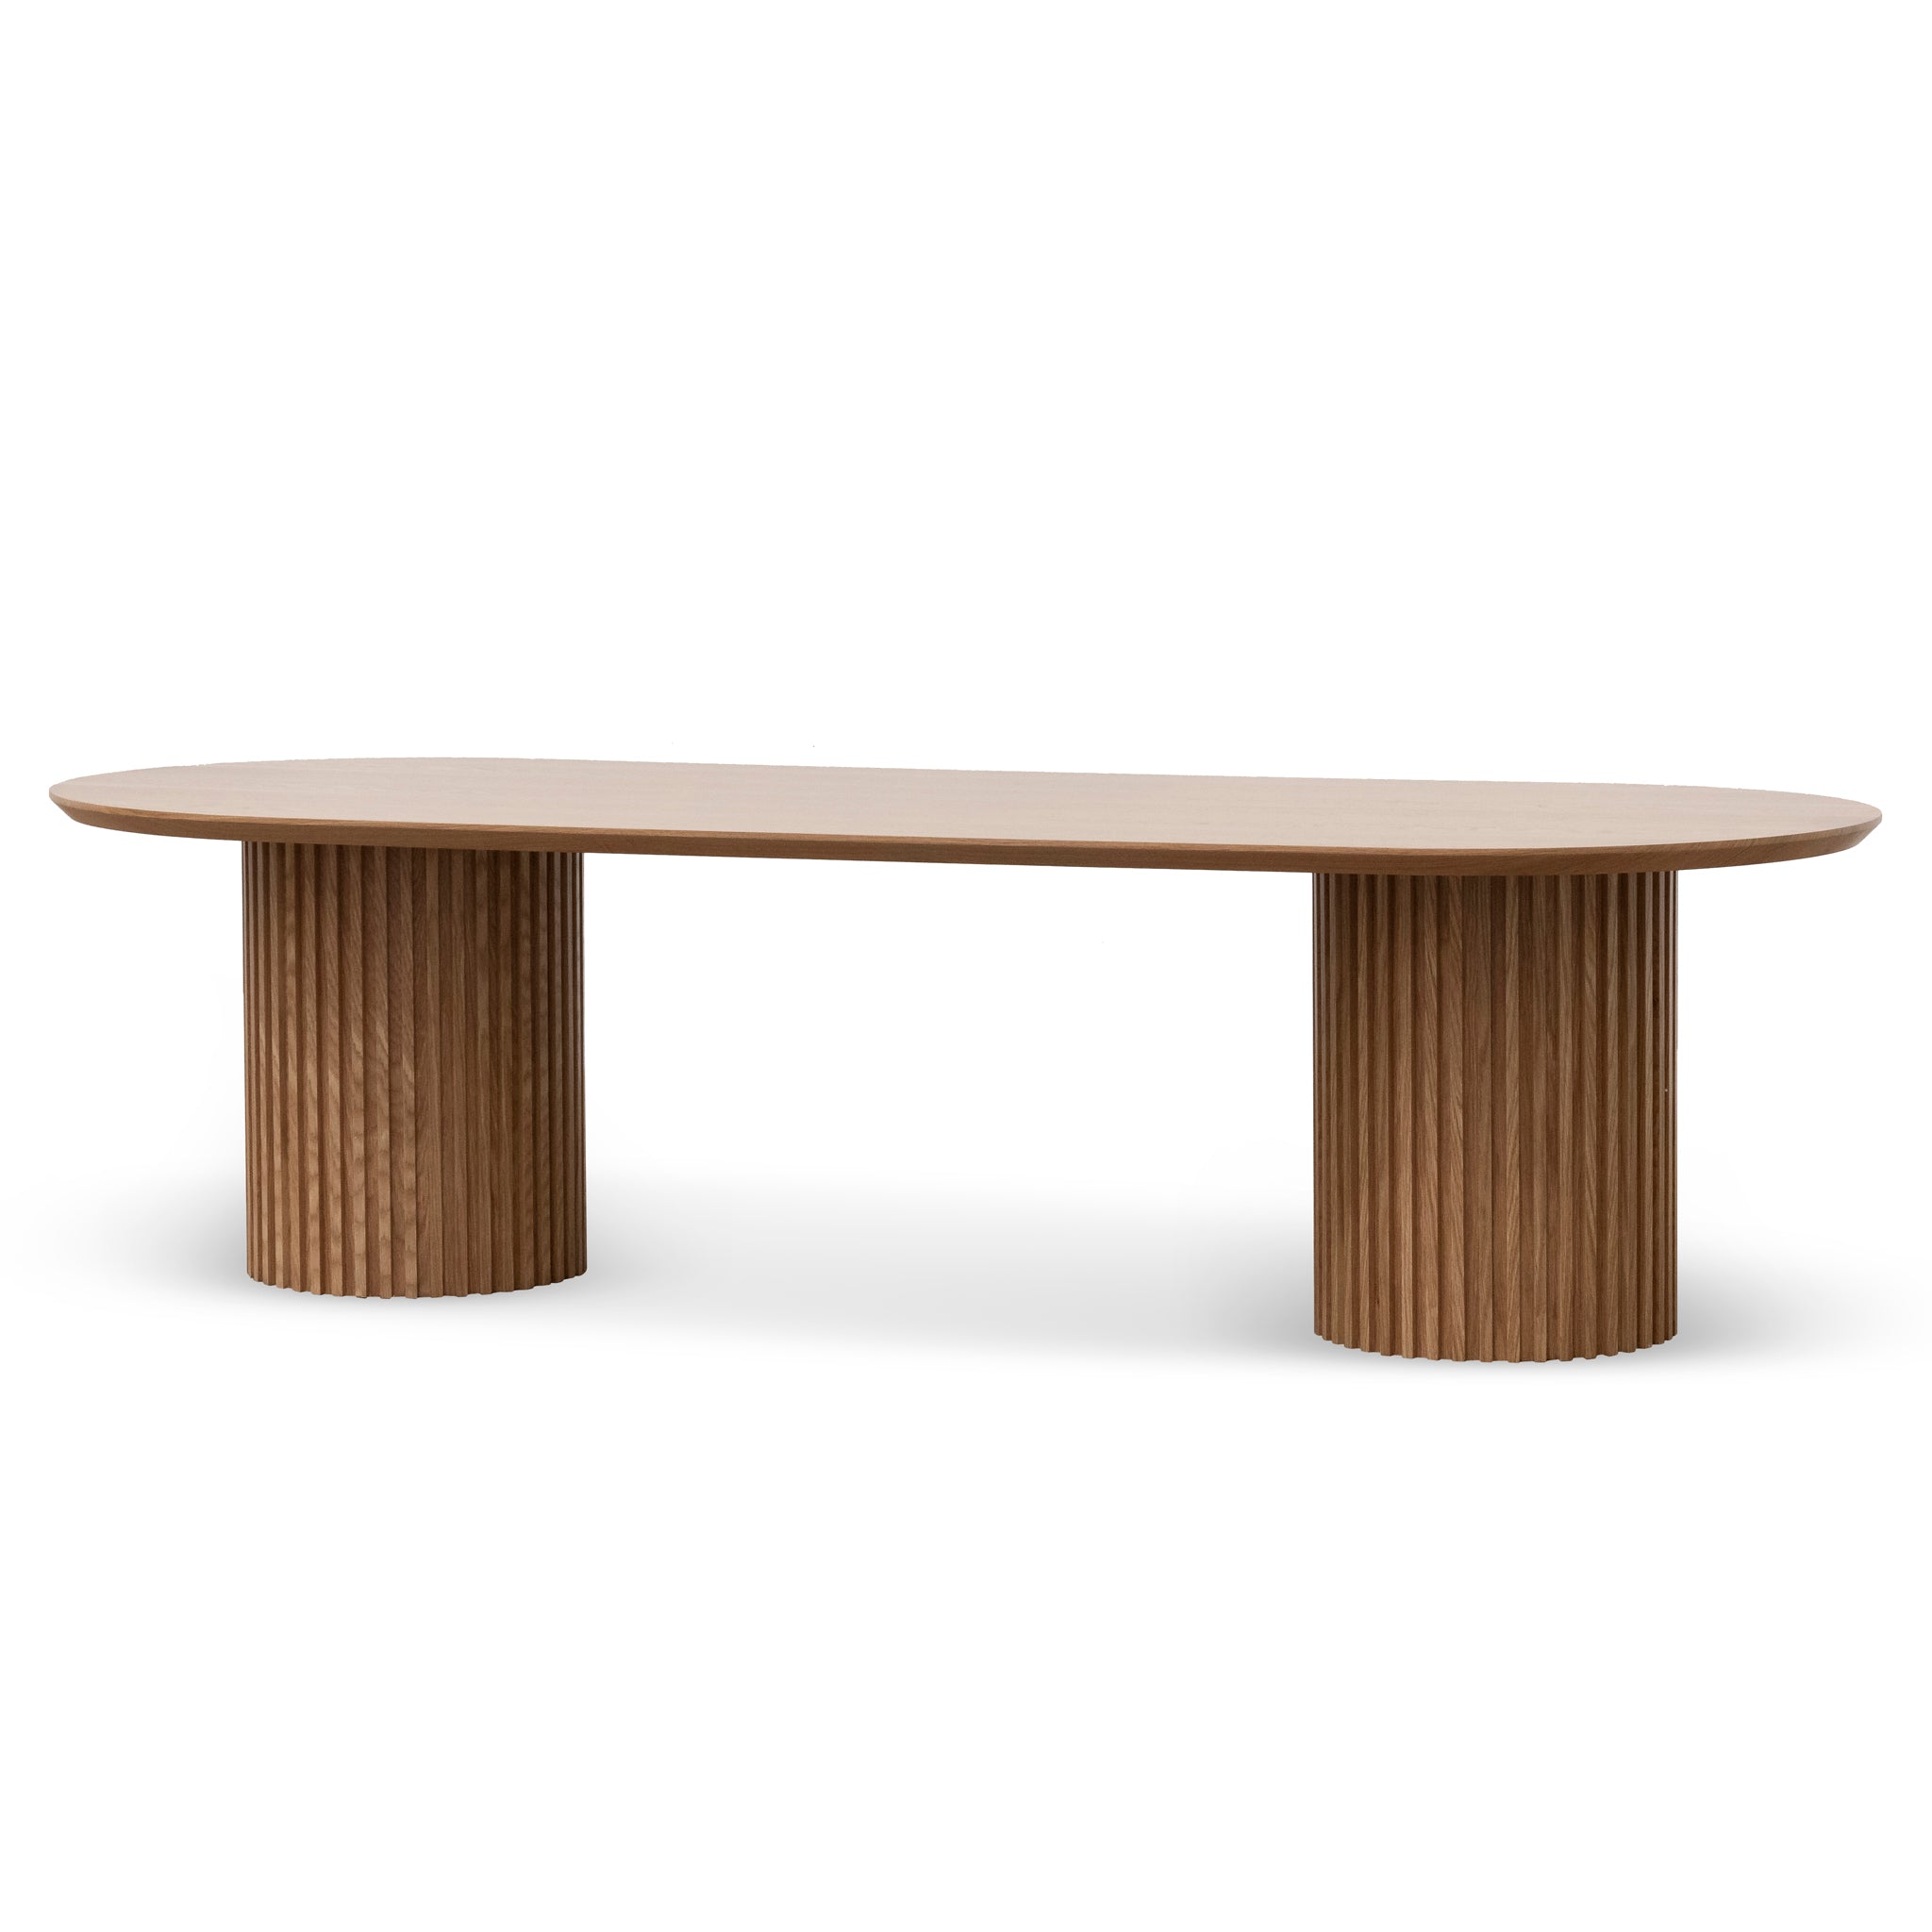 Vics 2.8m Wooden Dining Table - Natural - Dining Tables